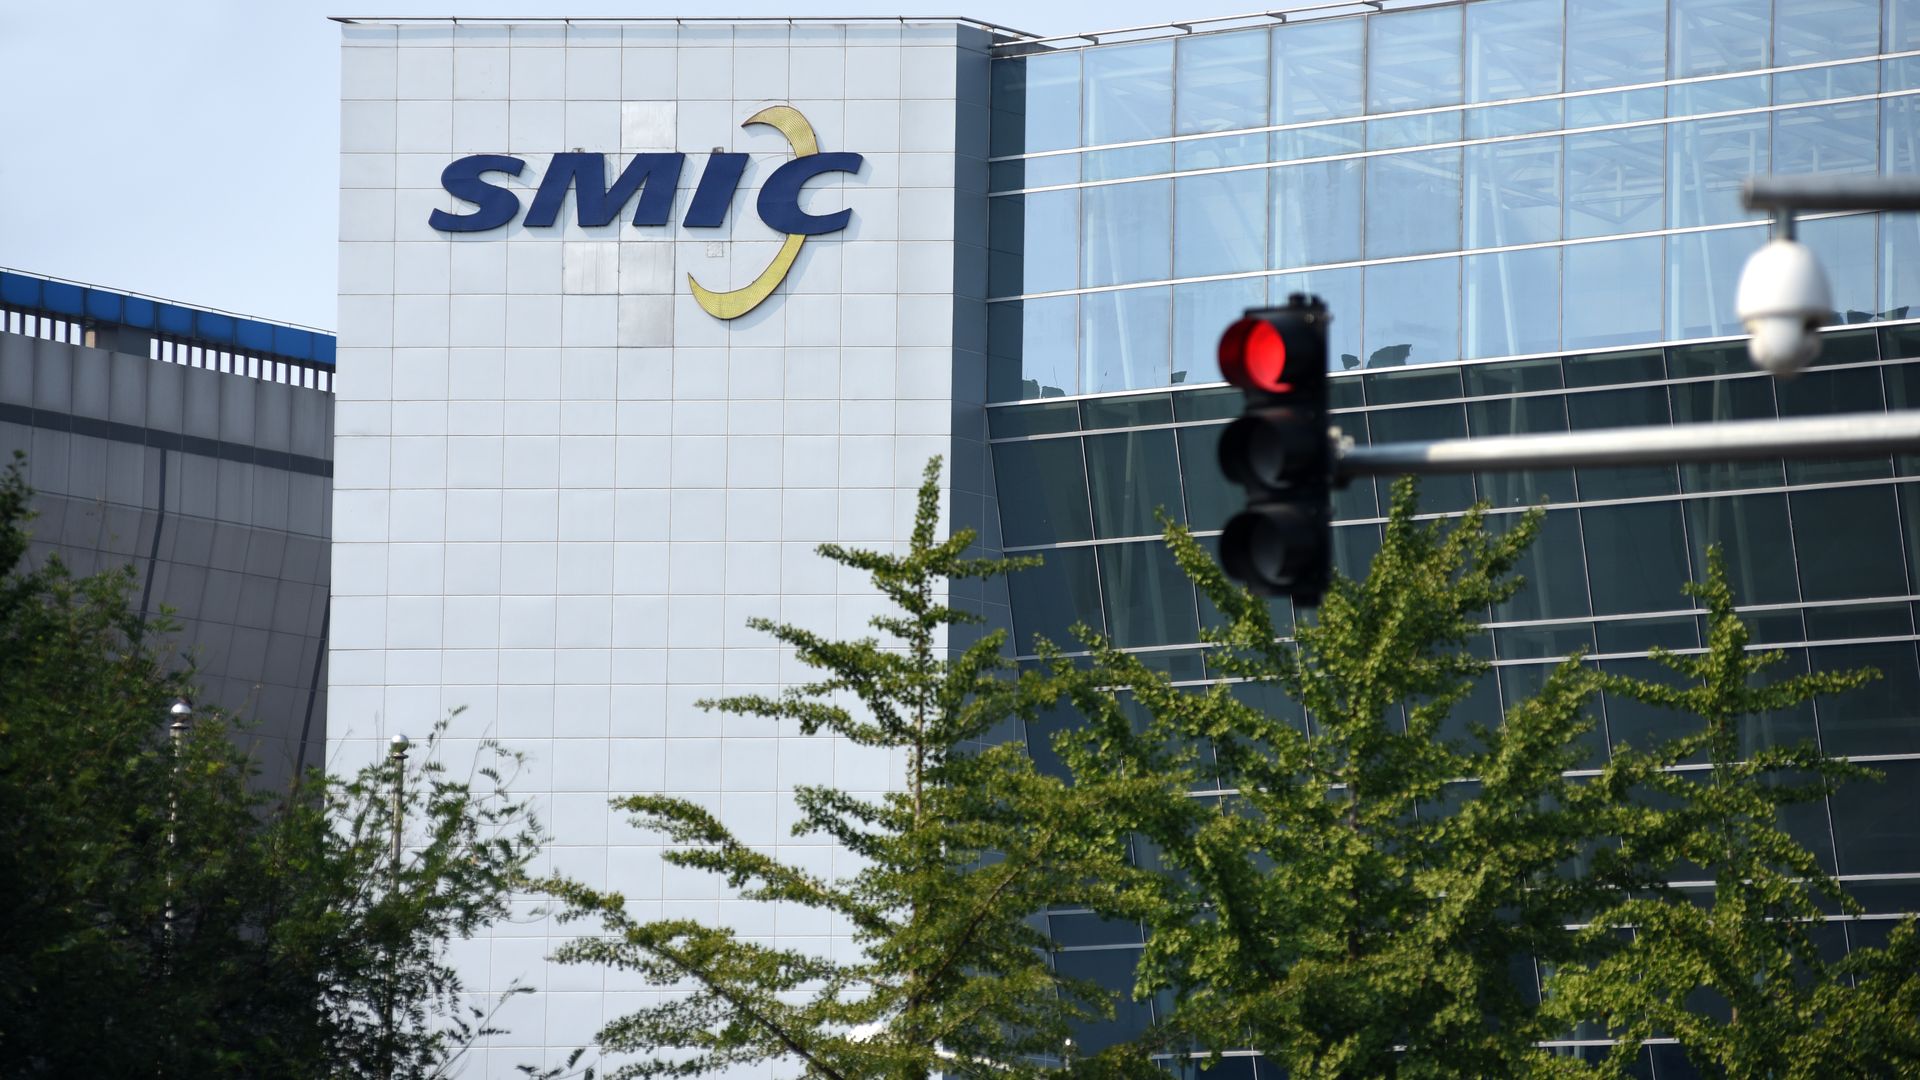 A logo hangs on the gate of the Beijing branch of Semiconductor Manufacturing International Corporation (SMIC) on September 6, 2020 in Beijing, China